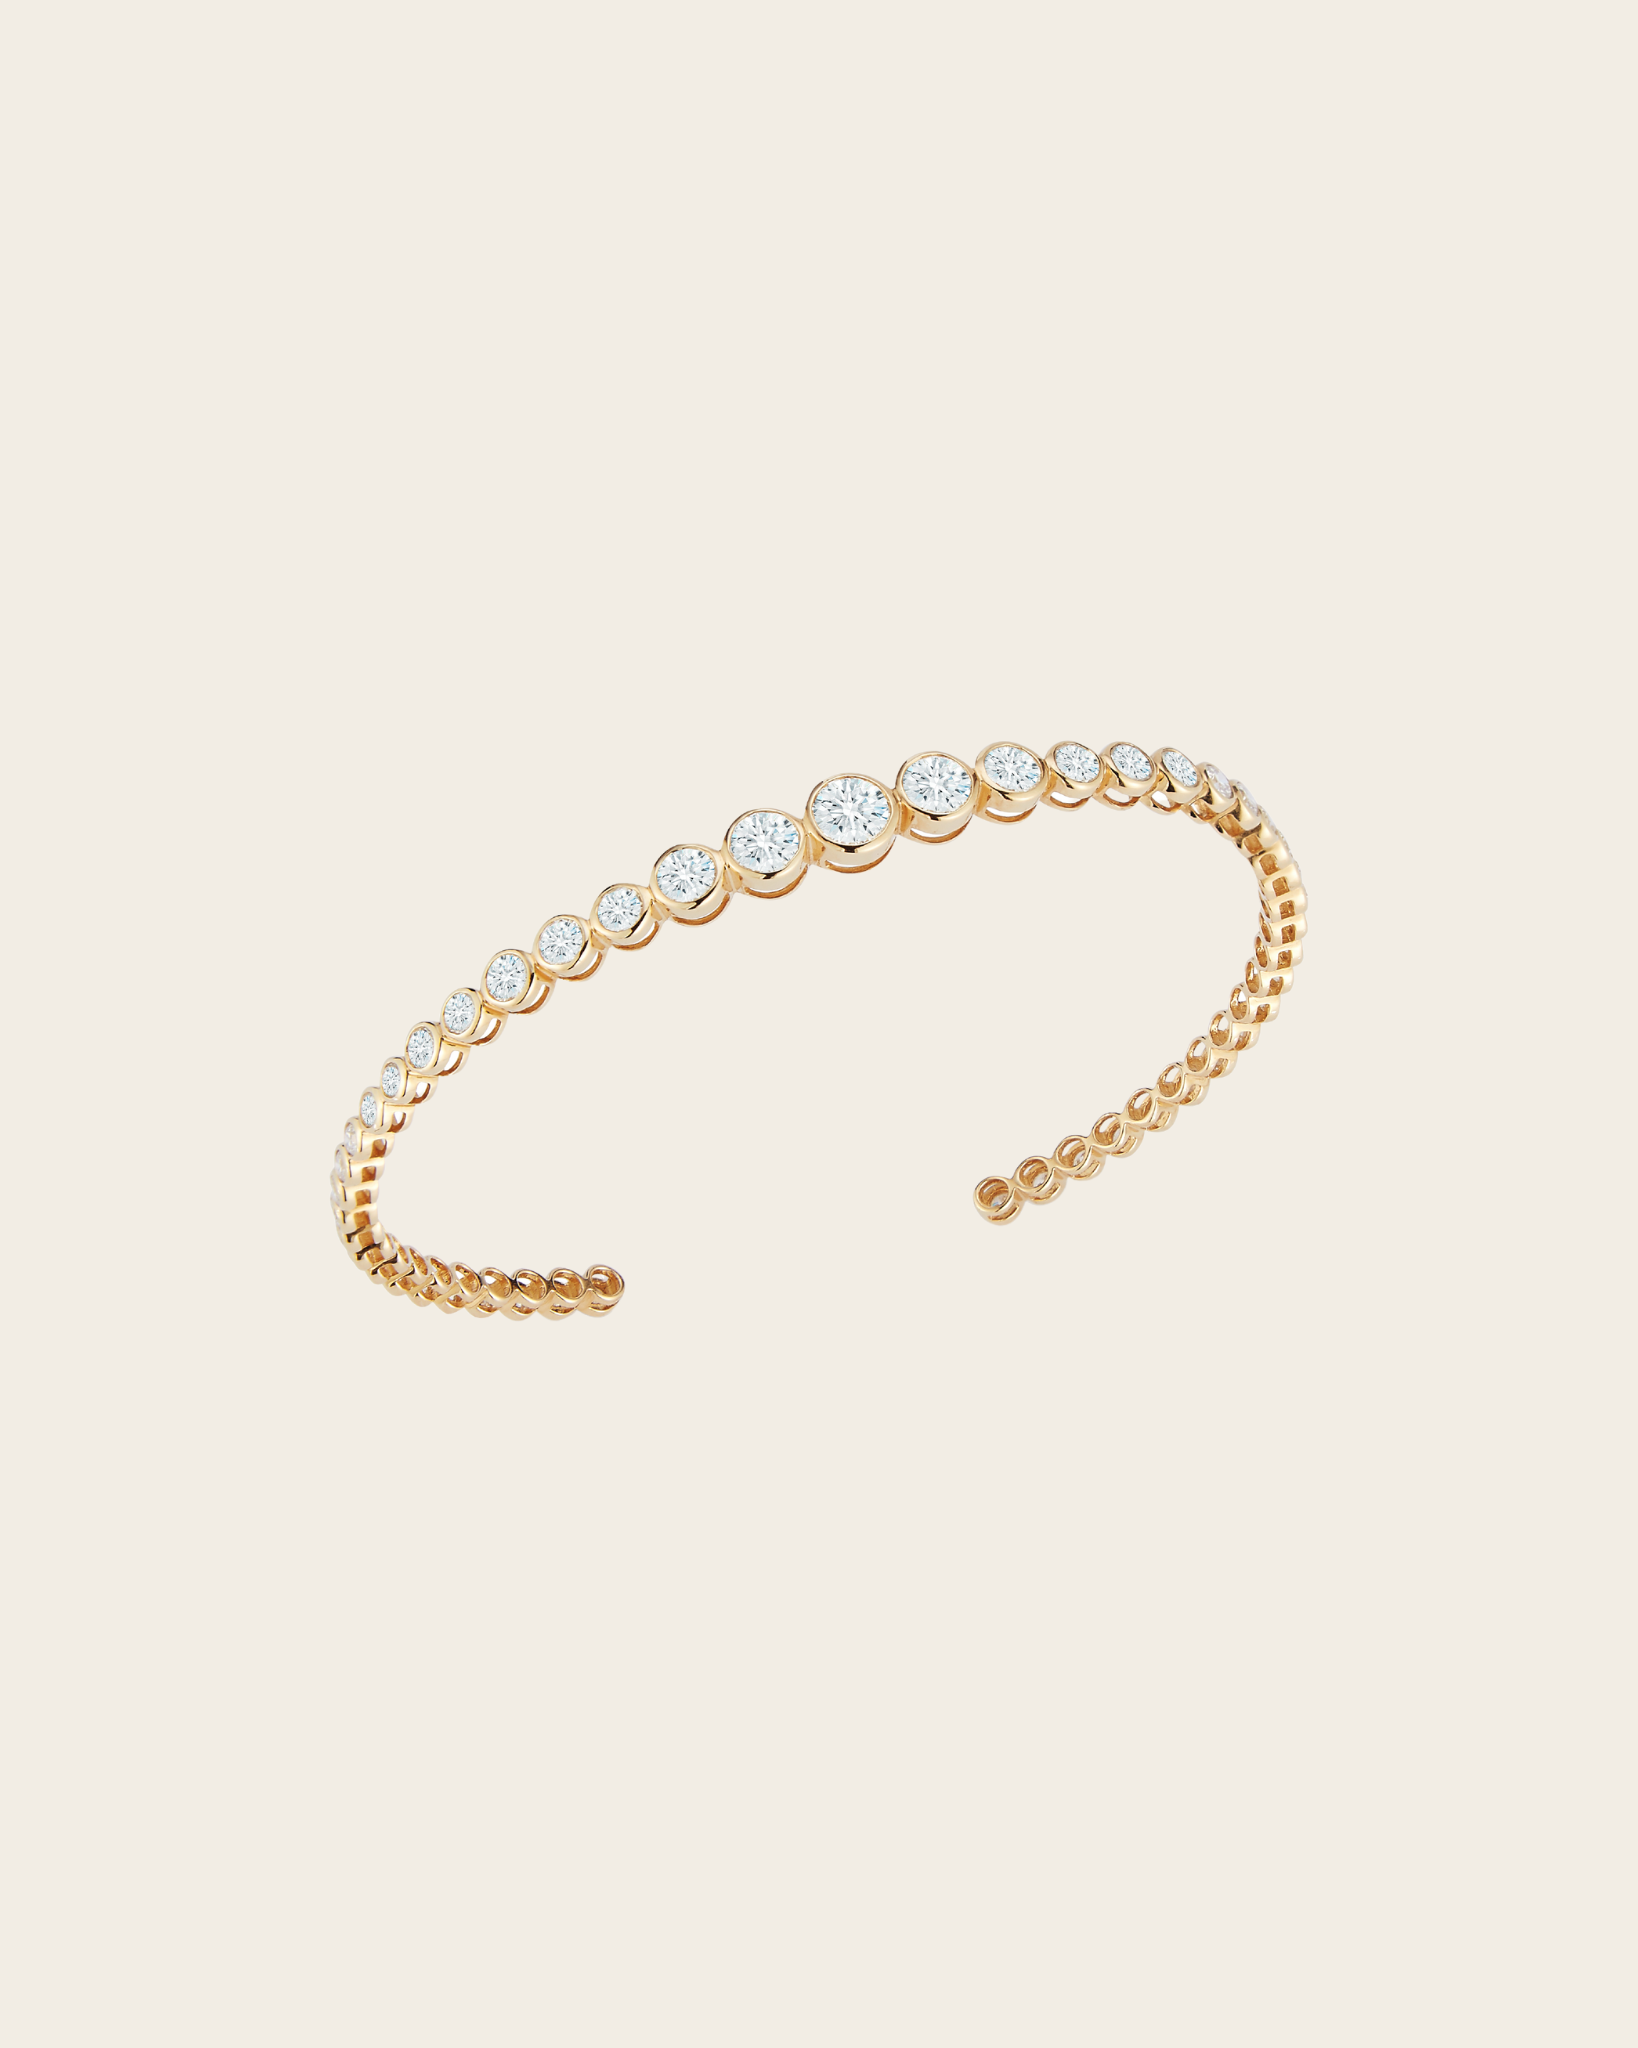 Inspired by the electric movement of light, diamonds ignite on your wrist with our single row Lumiére Bracelet.  Single row of bezel-set graduated diamonds, invisible side hinge, 18kt yellow gold  18kt Yellow Gold 2.76 Total Diamond Carat Weight SI / H Min. Diamond Quality Handmade in Thailand